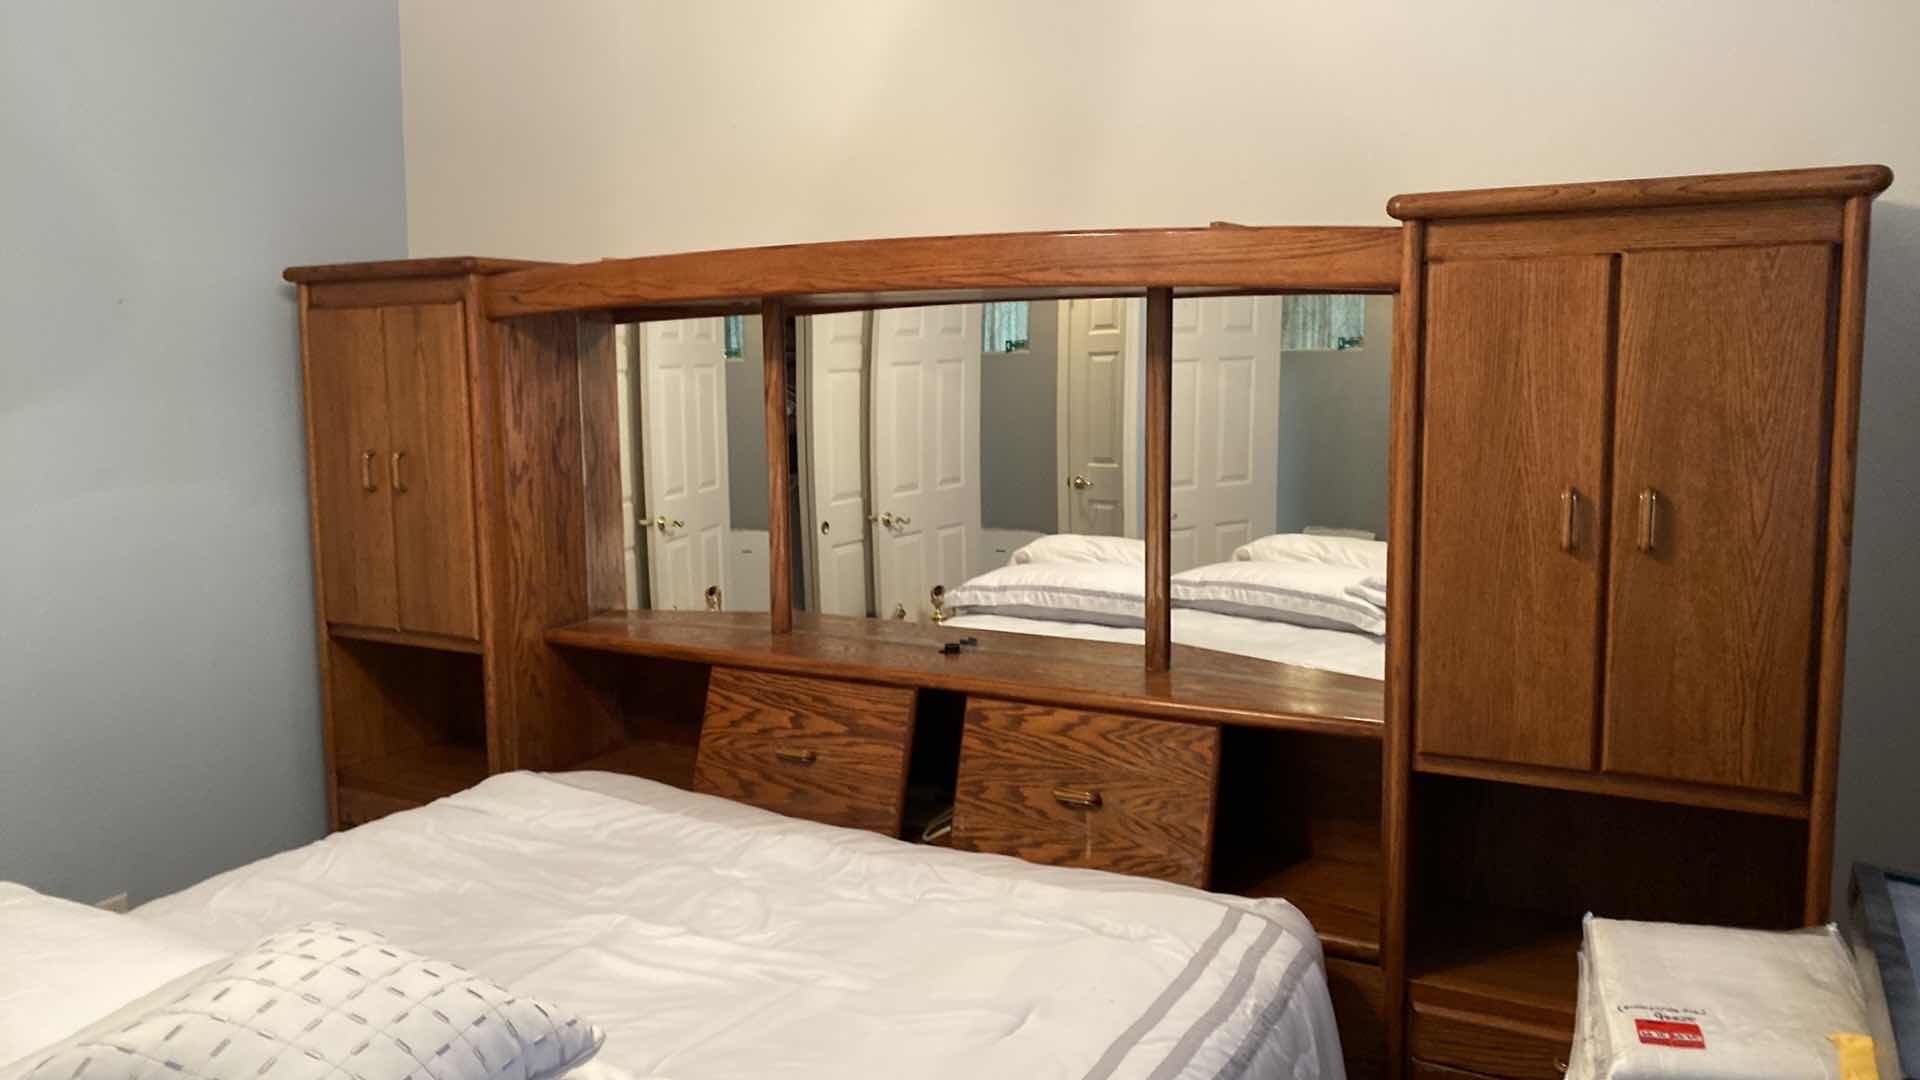 Photo 6 of CALIFORNIA/EASTERN KING OAK BEDFRAME WITH MIRRORED HEADBOARD AND NIGHT STANDS